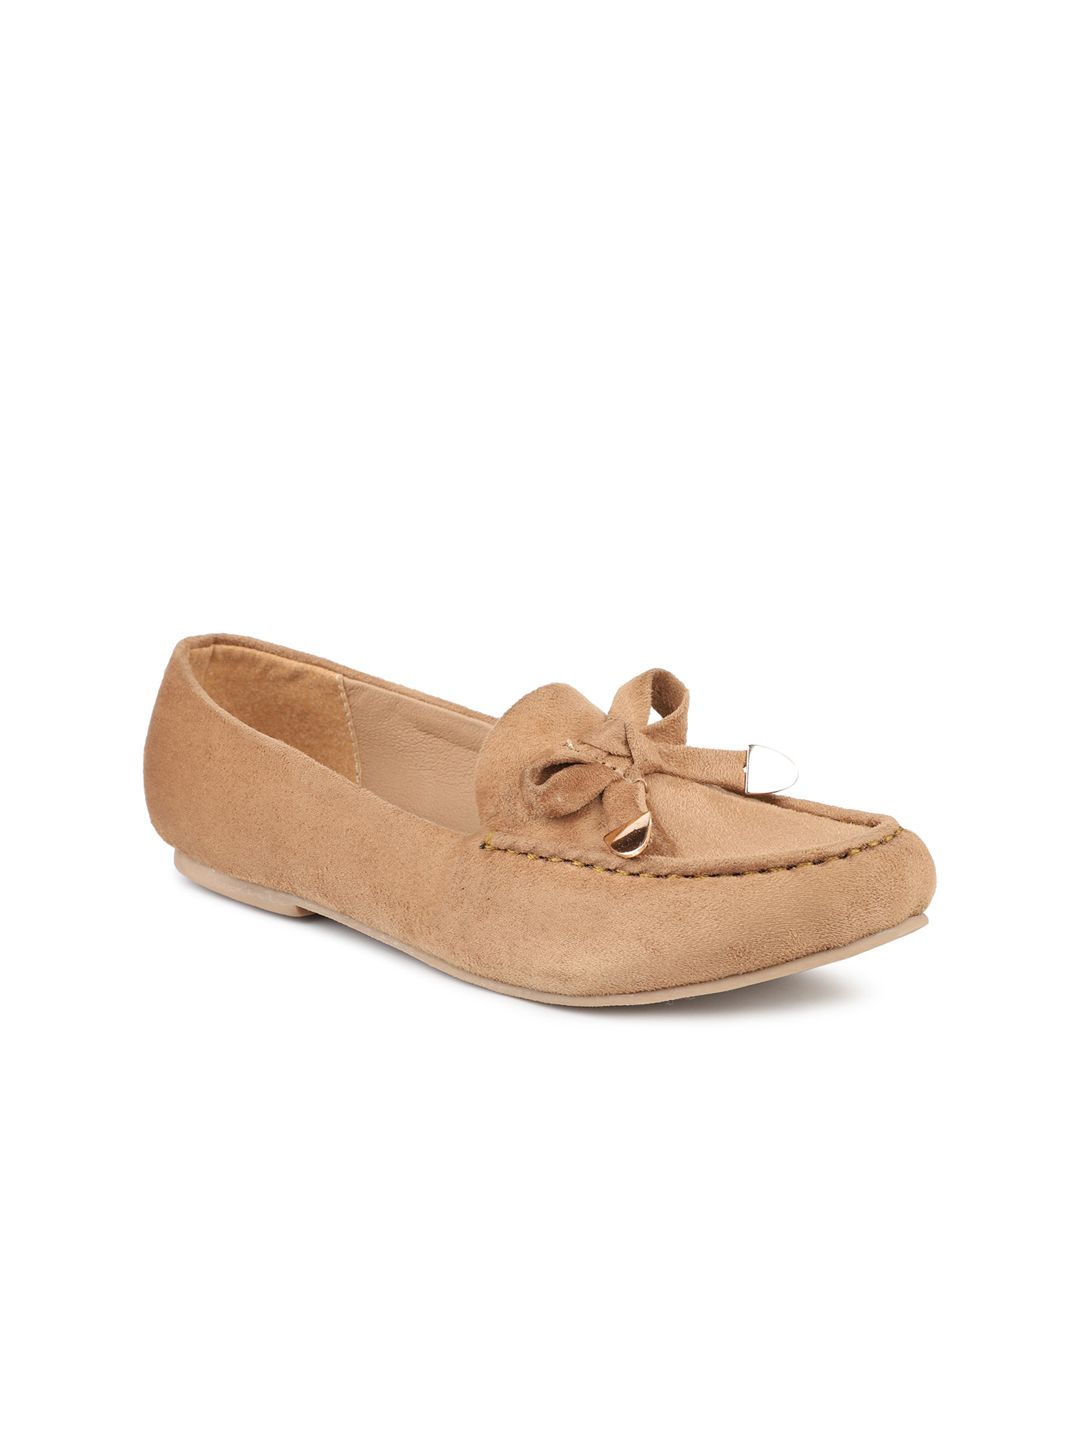 DESIGN CREW Women Beige Suede Loafers with Bow Price in India